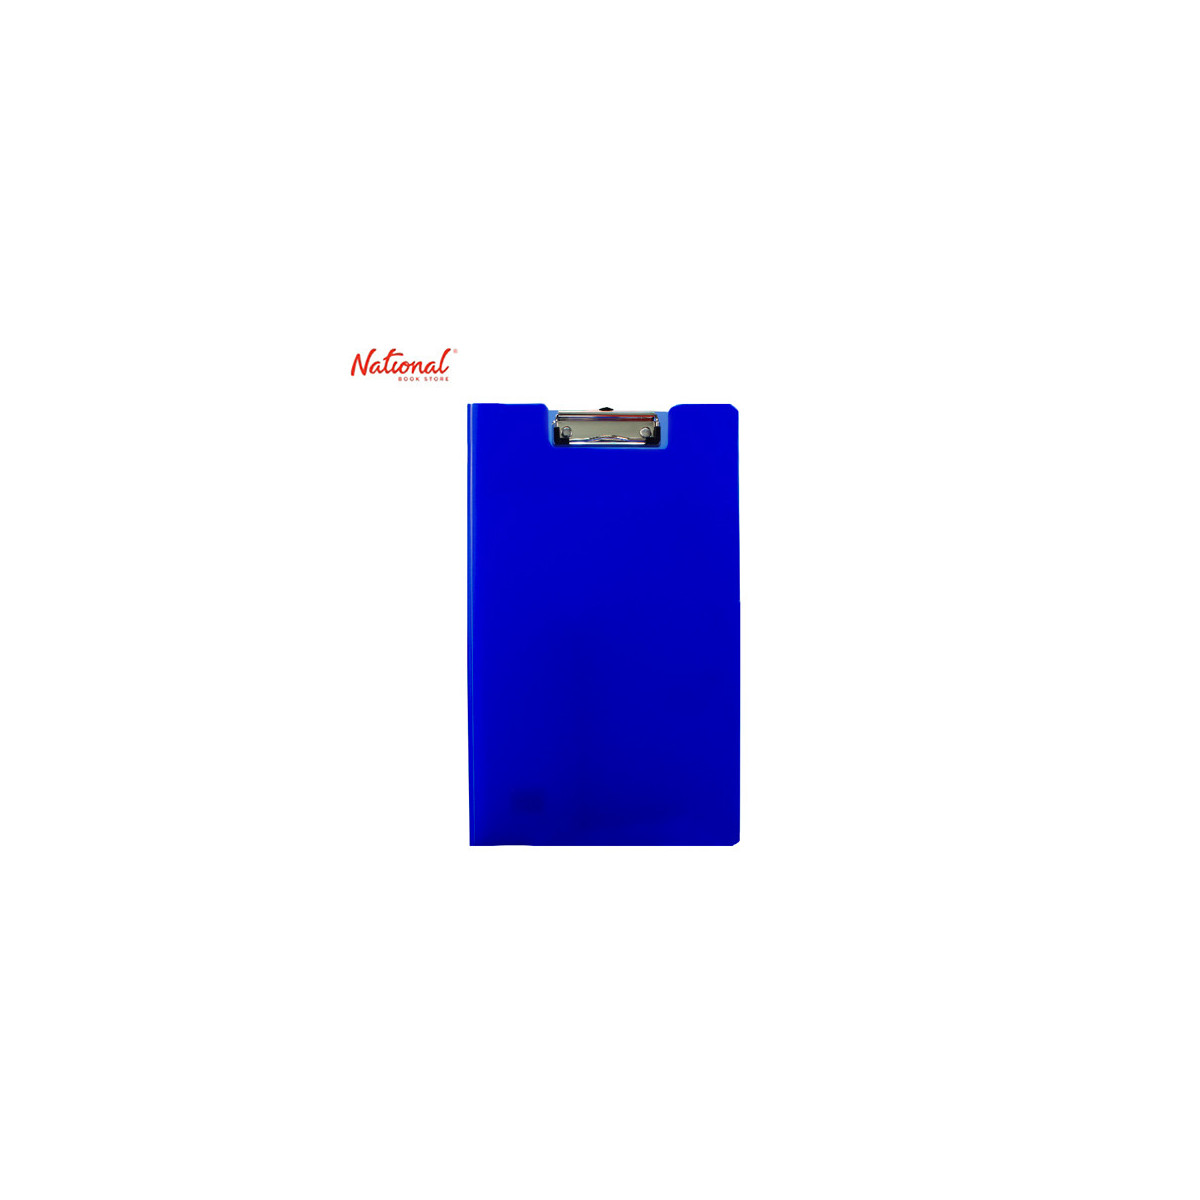 PORTFOLIO CLIPBOARD P8316L  LONG W COVER  AND BACK POCKET PLASTIC MATERIAL, BLUE